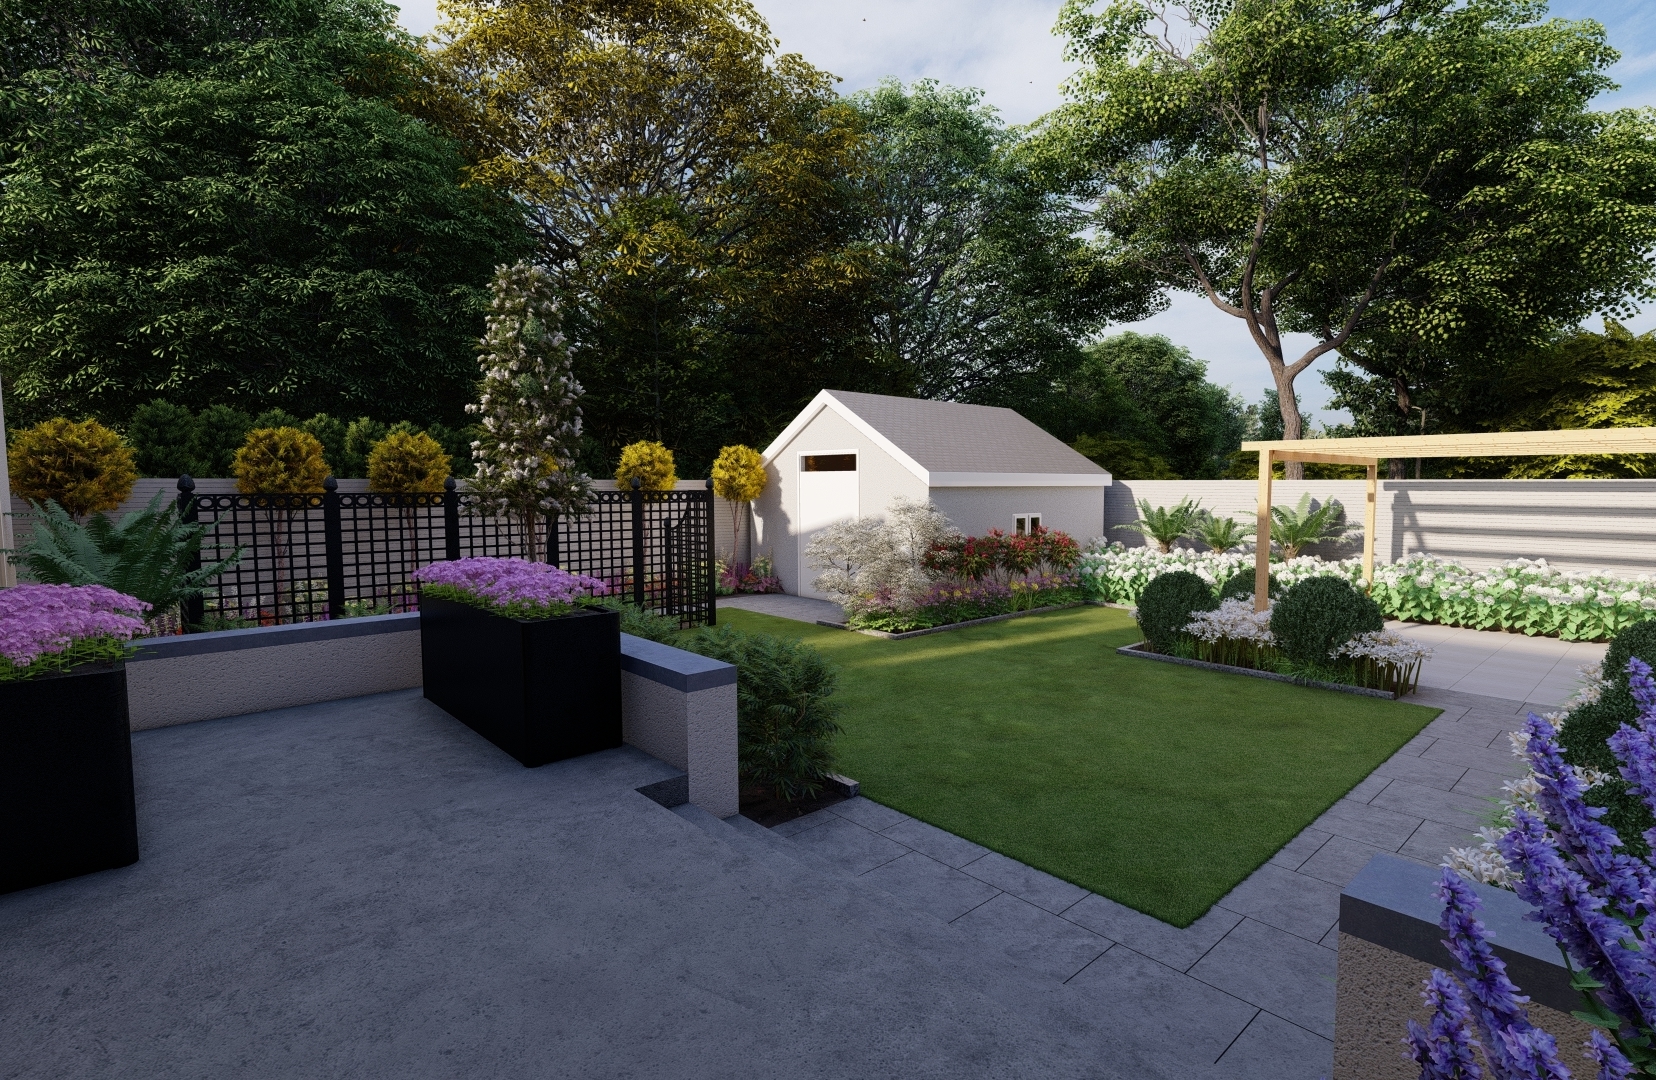 Family Garden Design in Terenure, Dublin 6W with Bespoke Fencing and custom made steel garden Trellis screens separating ornamental and vegetable growing spaces | Owen Chubb Garden Landscapers, Tel 087-2306128